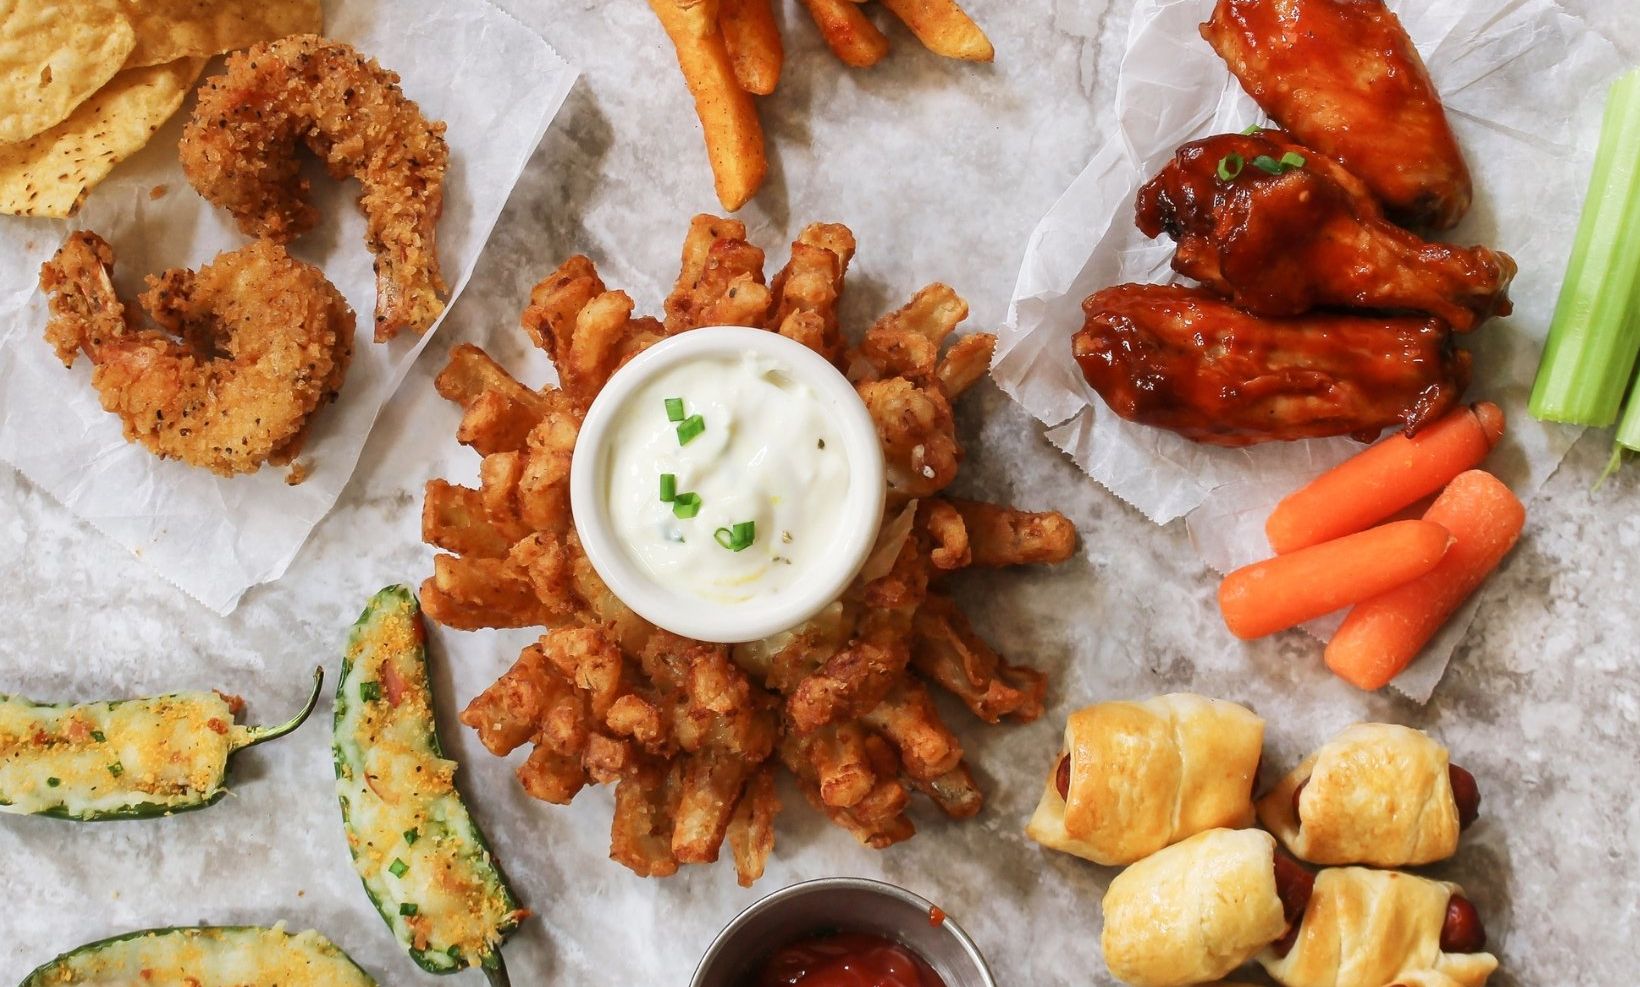 A wide variety of tailgate snacks are displayed on a counter top: Jalapeño poppers, fried onion bloom, pigs in a blanket, buffalo chicken wings, fried shrimp and fries.